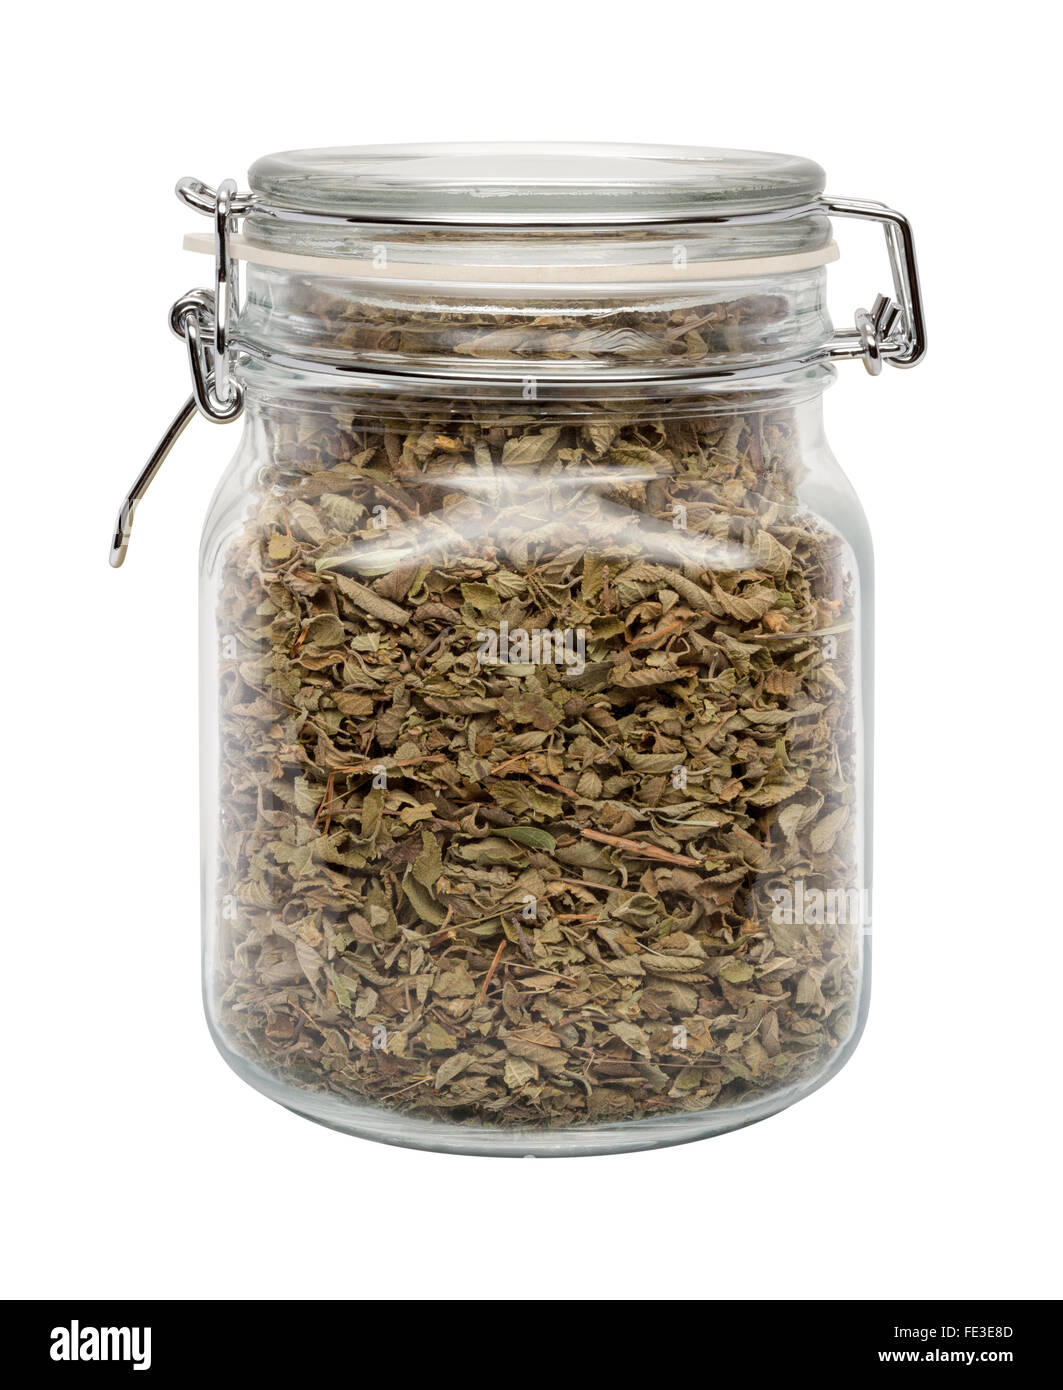 Dried Oregano Leaves in a Glass Canister with a Metal Clamp. The image is a cut out, isolated on a white background. Stock Photo